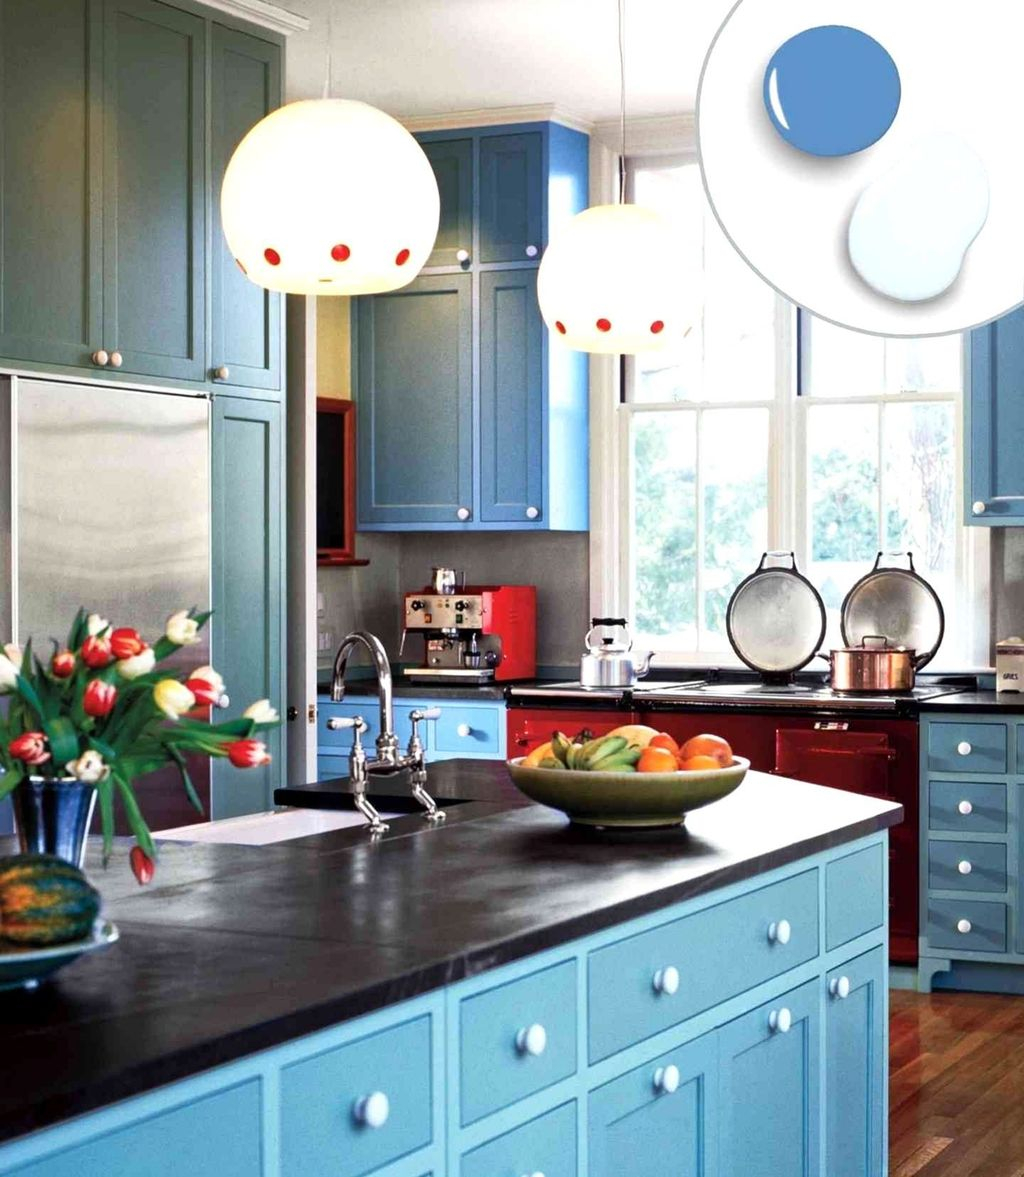 Impressive Gray And Turquoise Color Scheme Ideas For Your Kitchen26